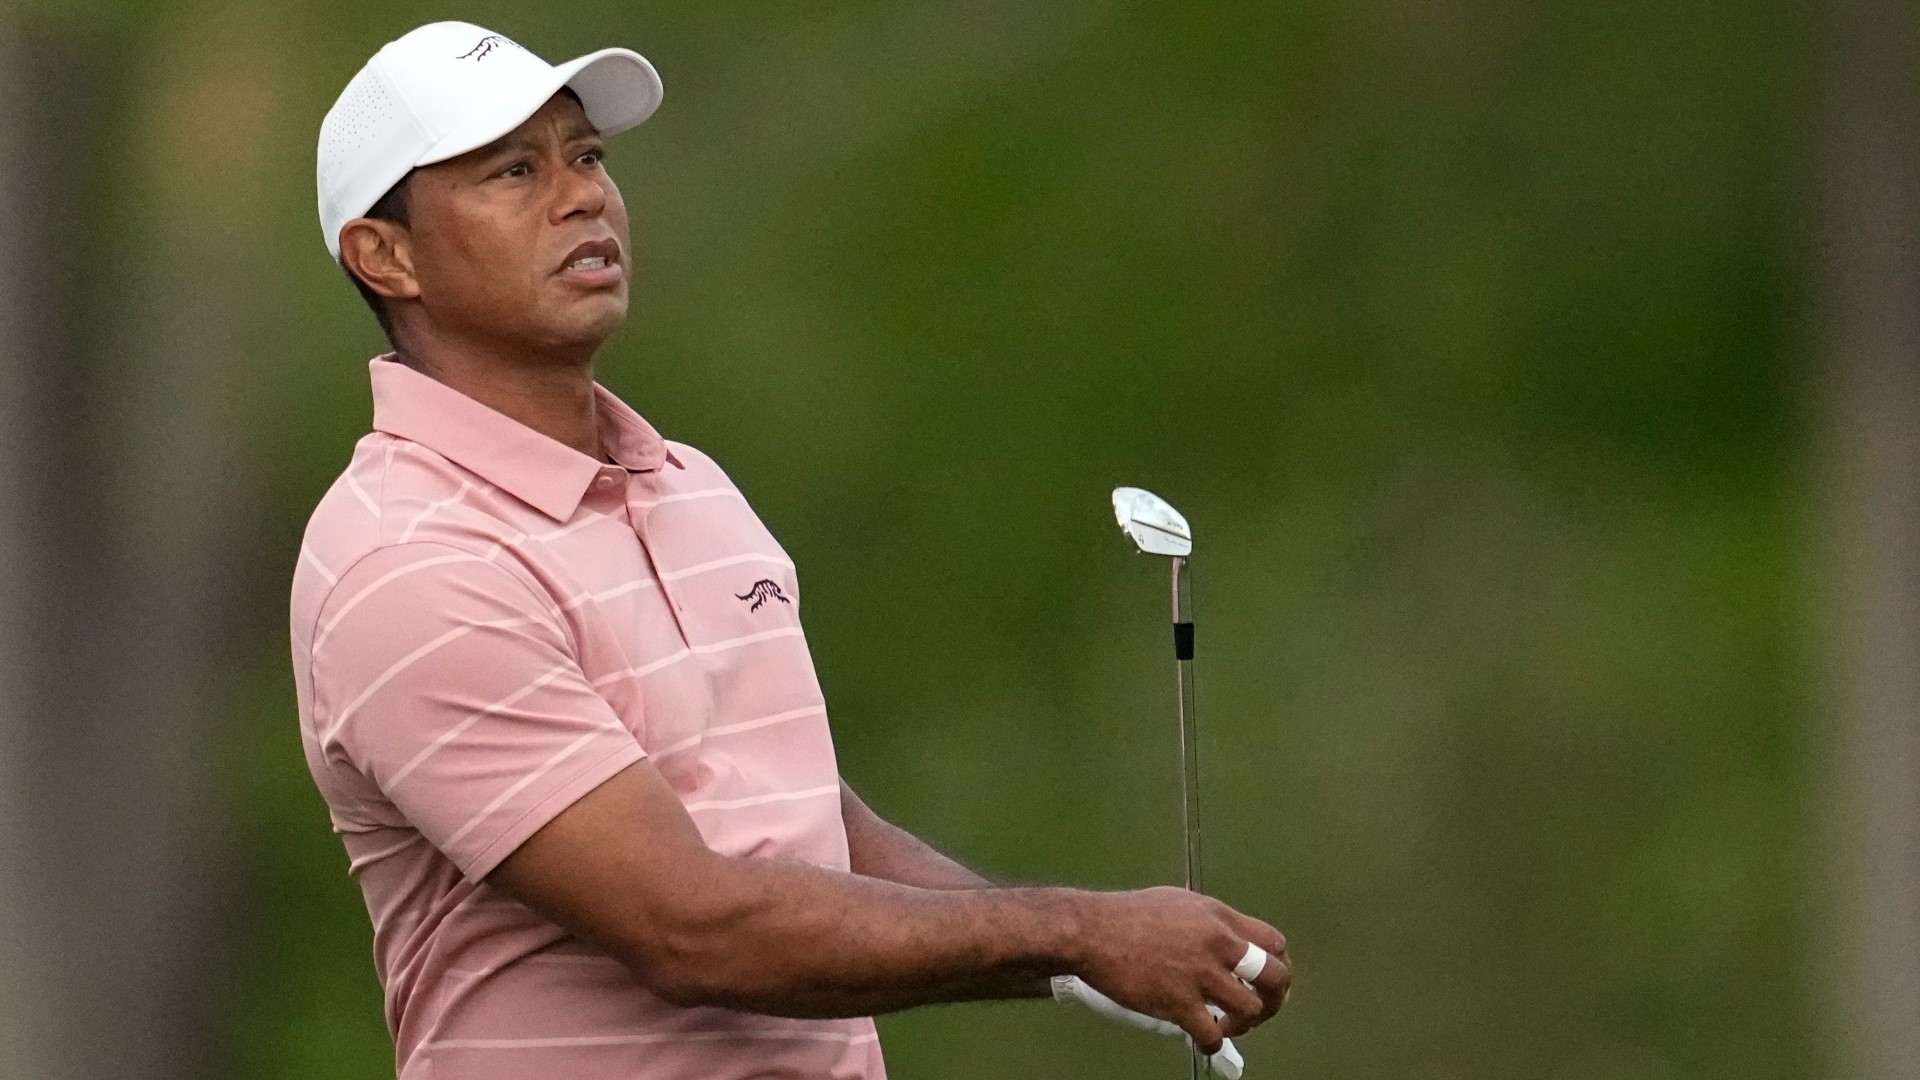 Tiger Woods makes the Masters cut for a record 24th time in a row